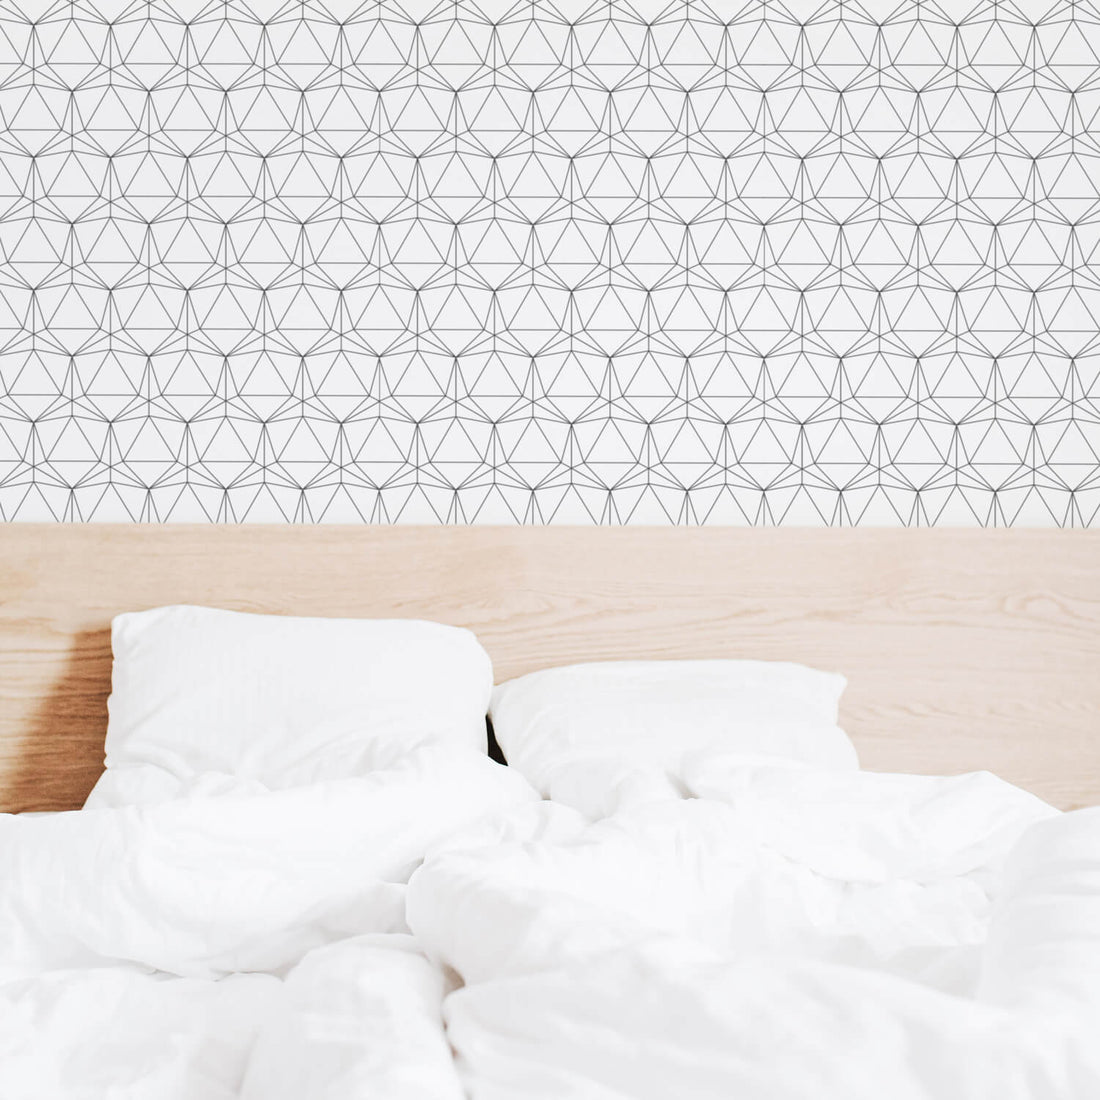 minimalistic style bedroom wallpaper with black and white geometric shapes